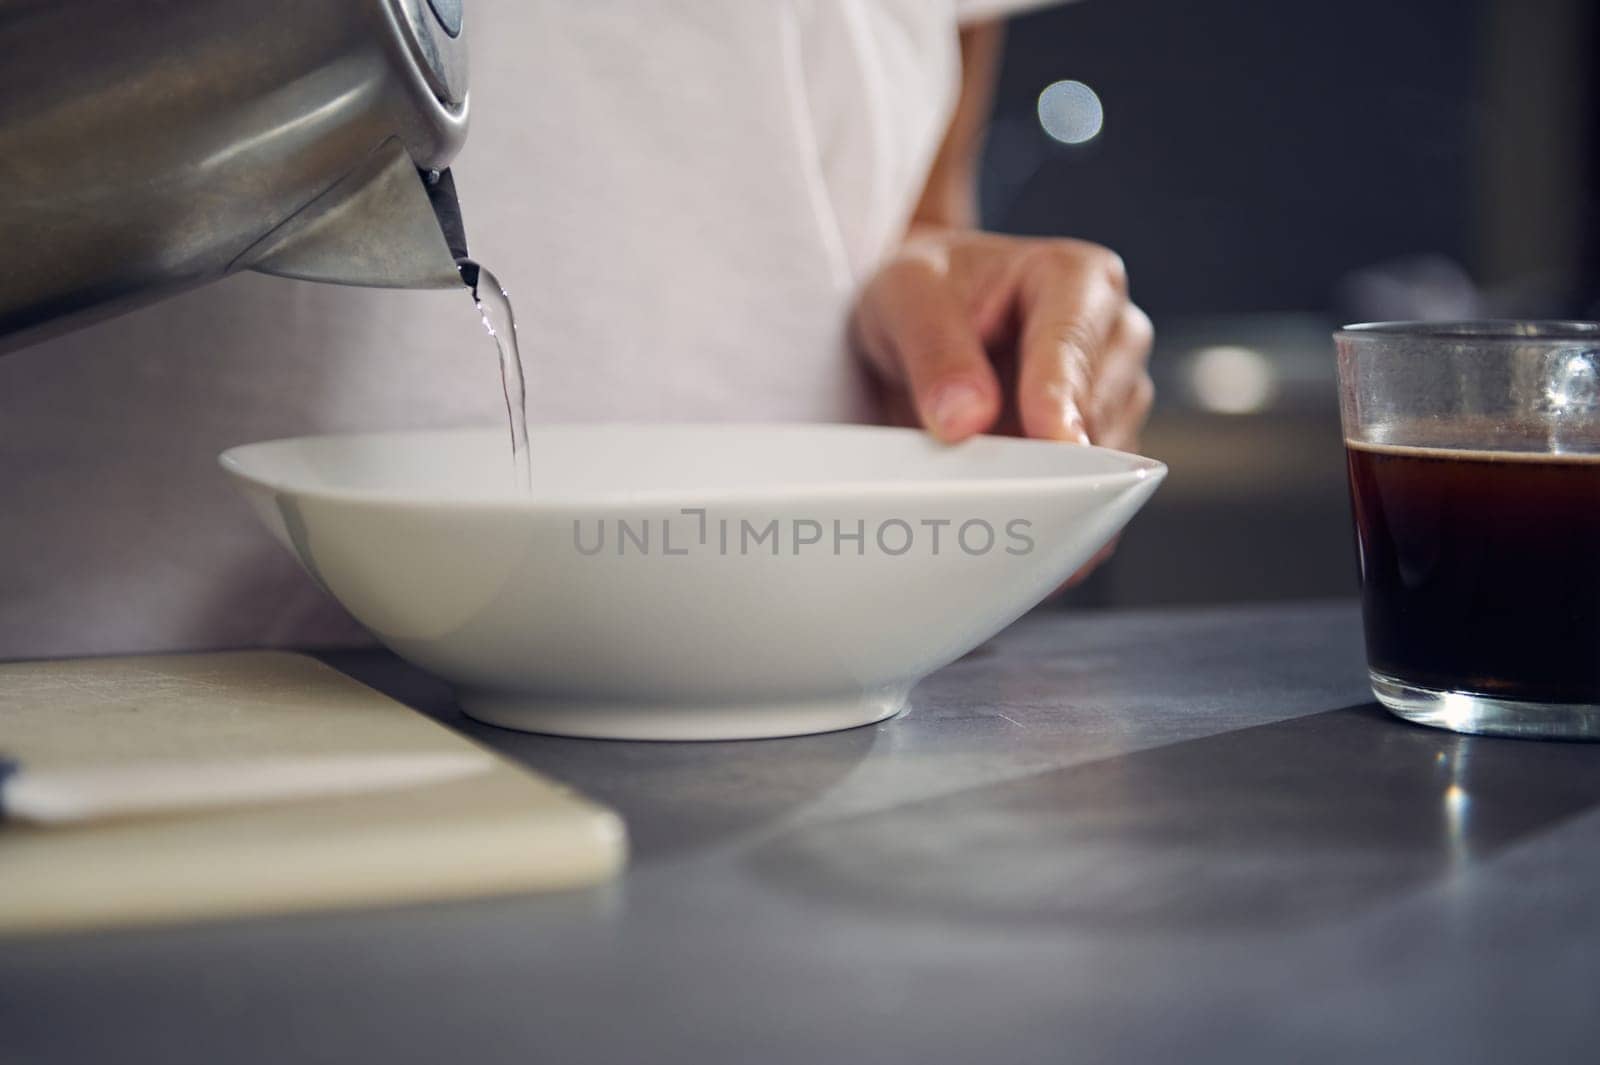 Close-up woman pouring boiled water from a teapot into a white bowl with oat flakes, preparing dry breakfast, standing t kitchen counter at home. Food and drink concept. Healthy eating